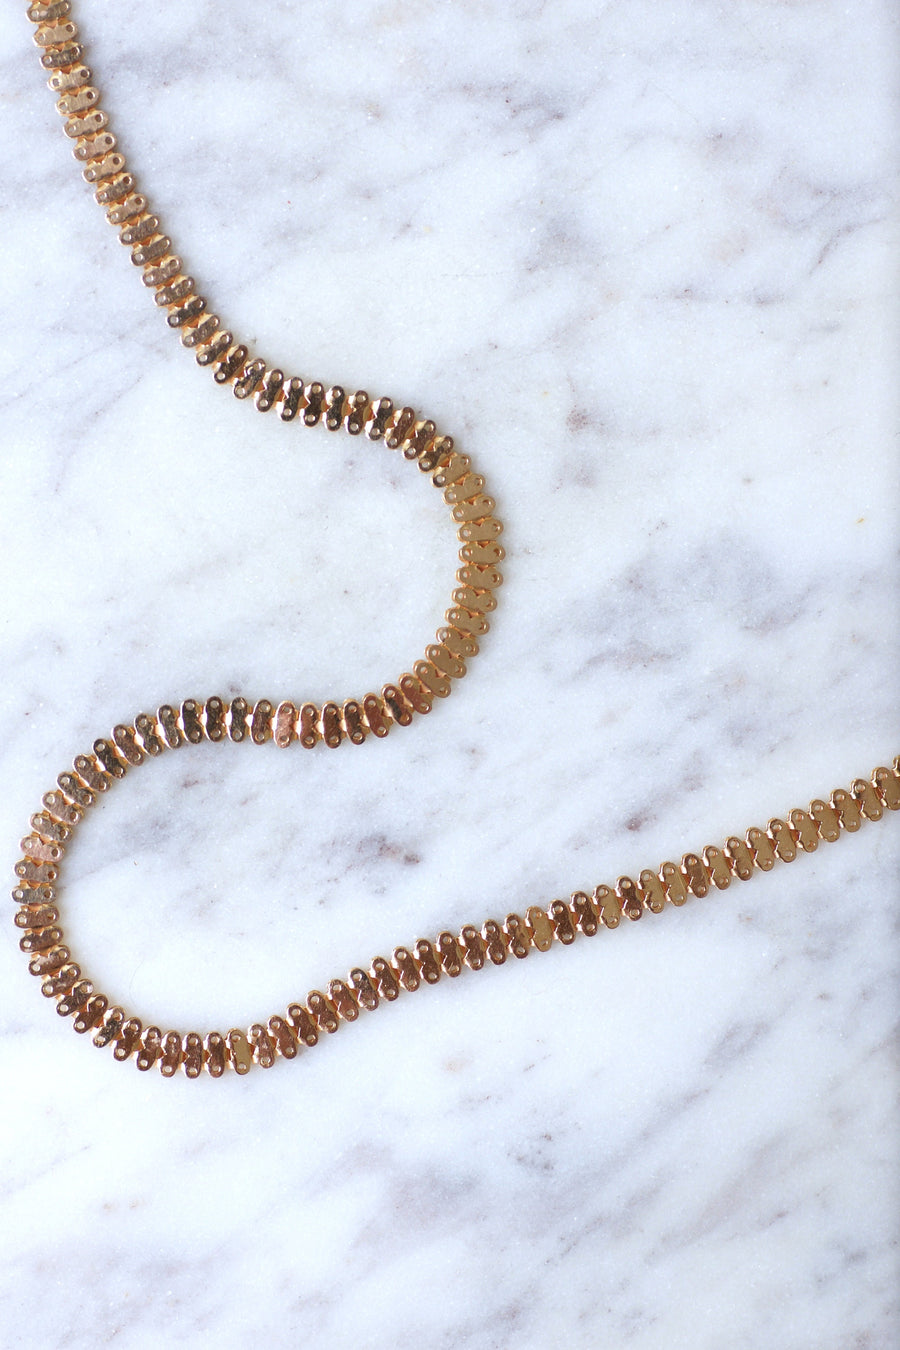 Vintage necklace chain in pink gold, fancy stitch